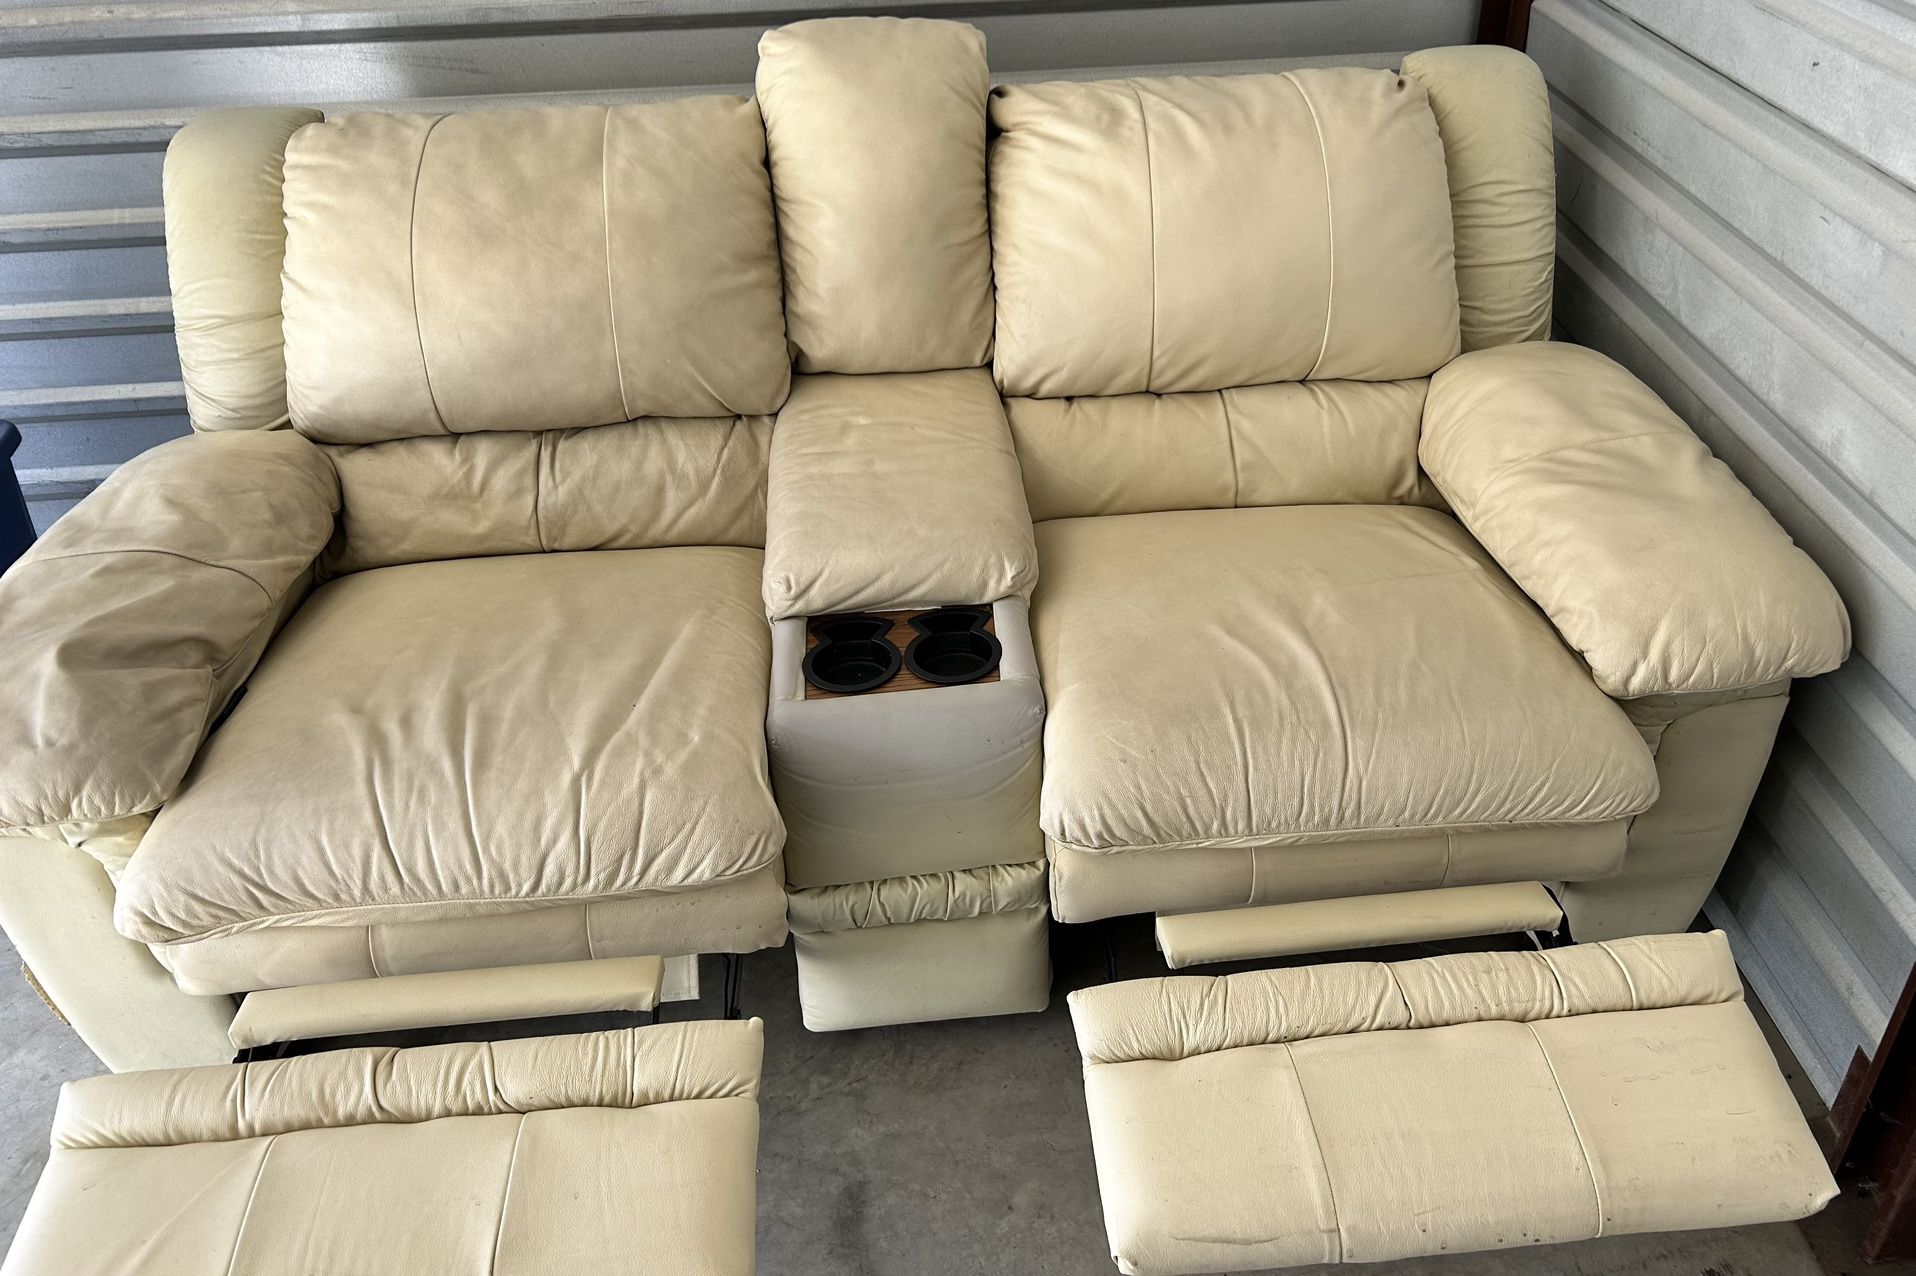 Double Seated All Genuine, Leather Reclining Loveseat,tan Colored La-Z-Boy